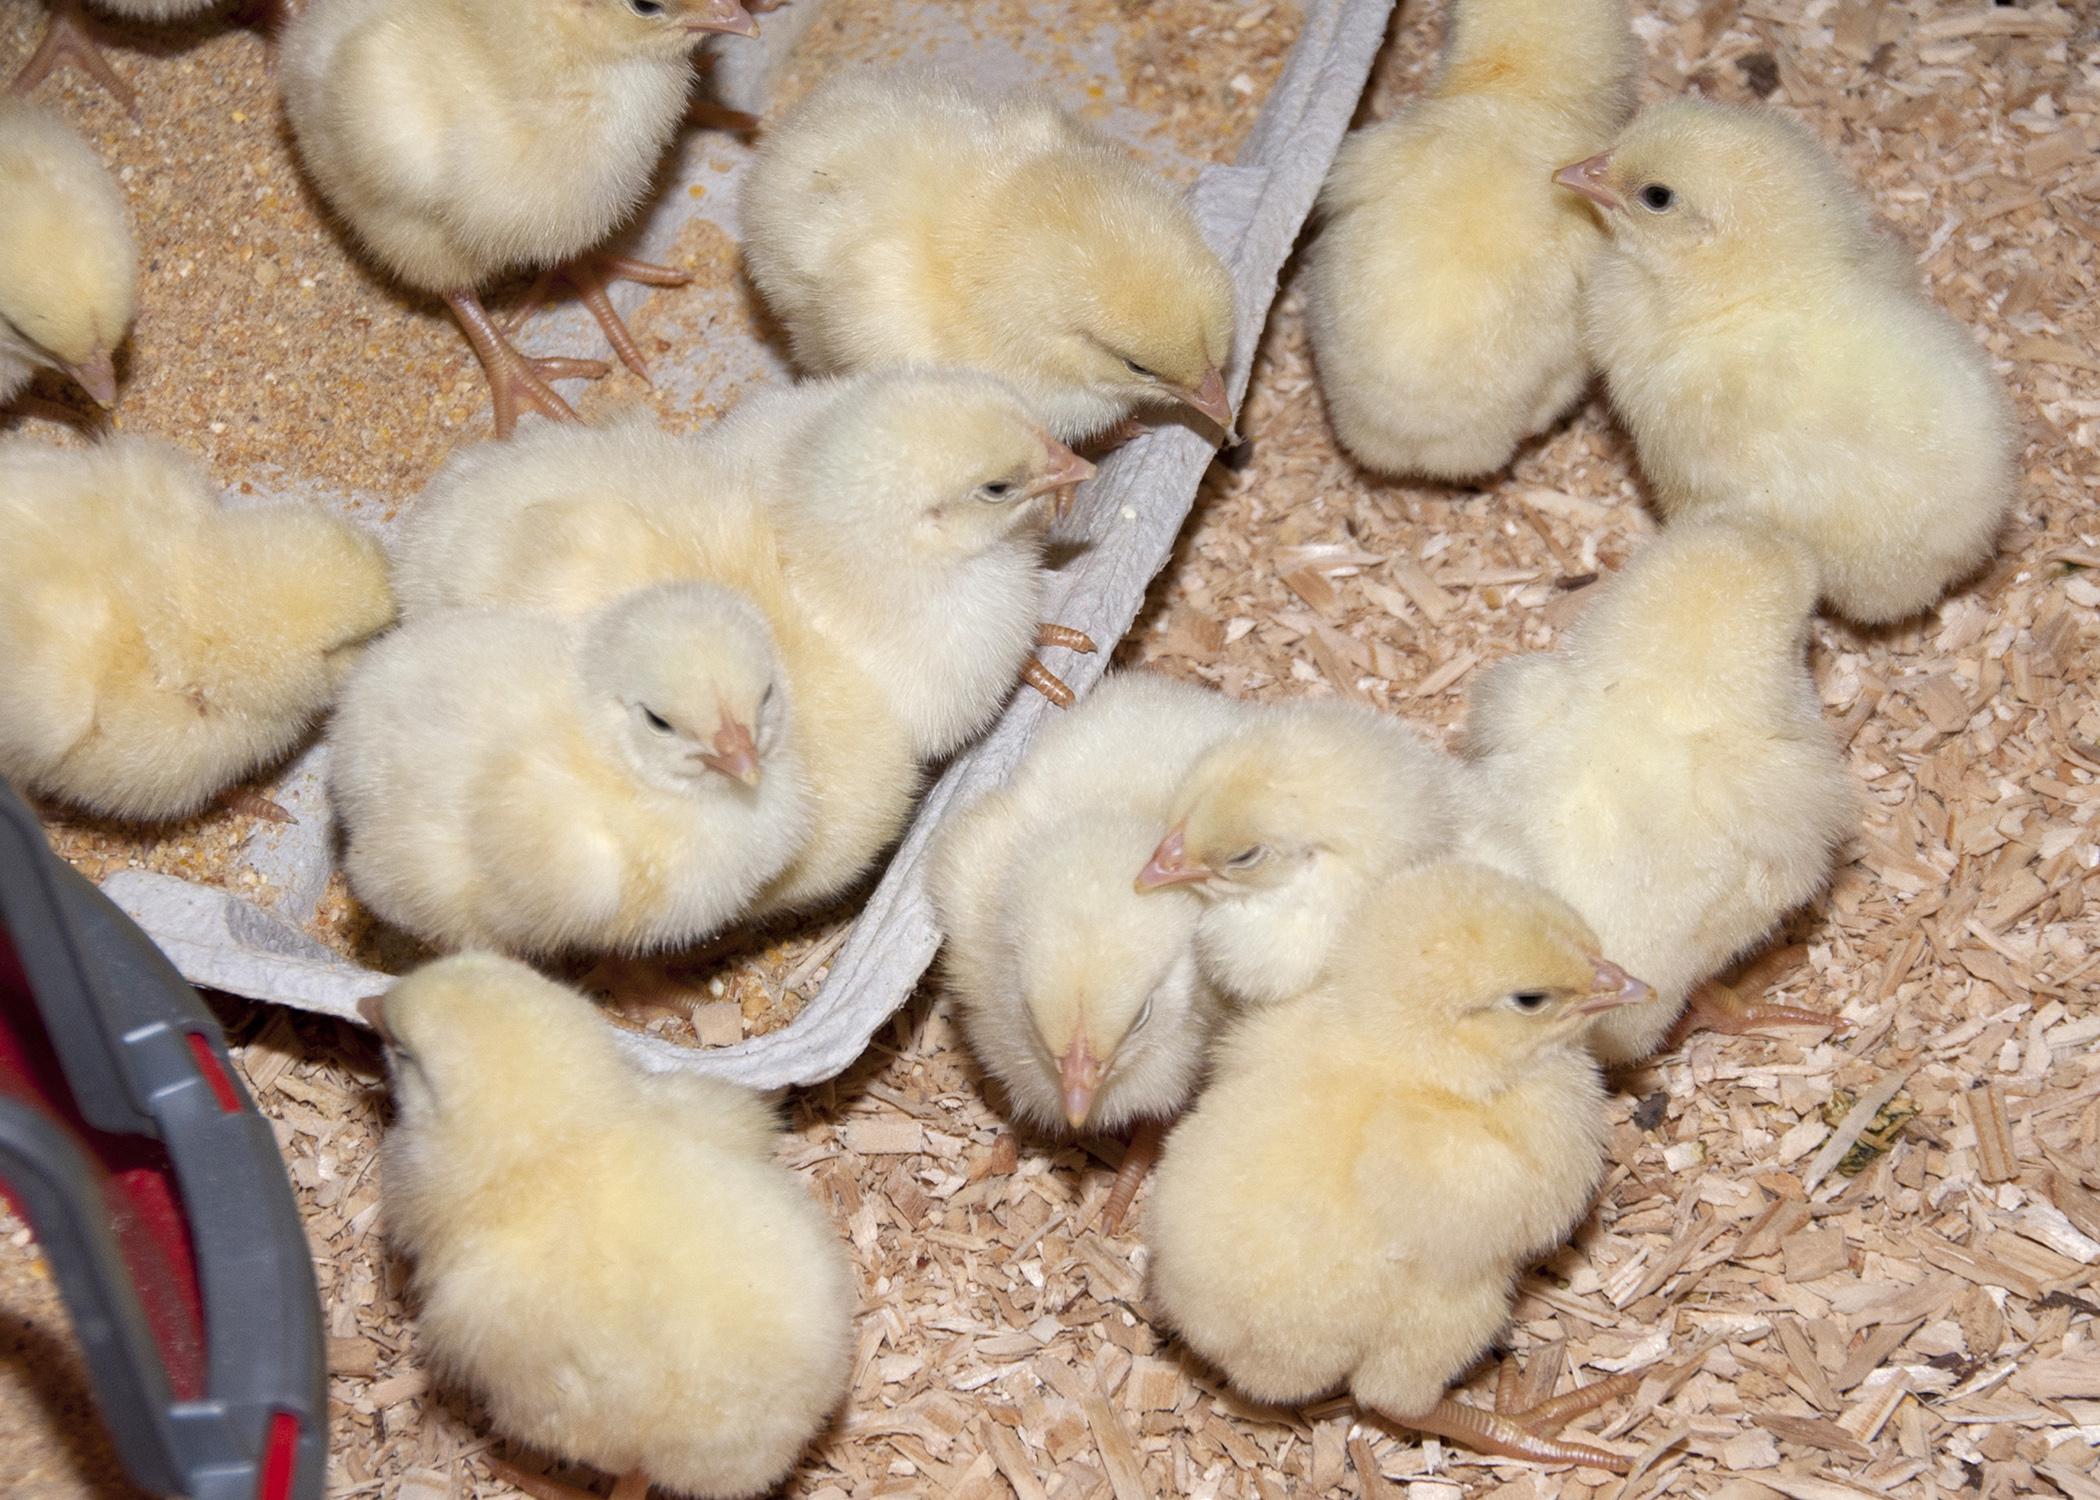 The poultry industry kept its No. 1 spot on the annual list of agricultural commodities, with an overall estimated production value of about $3.1 billion, a 6.4 percent increase from 2013. (Photo by MSU Extension Service/Kat Lawrence)